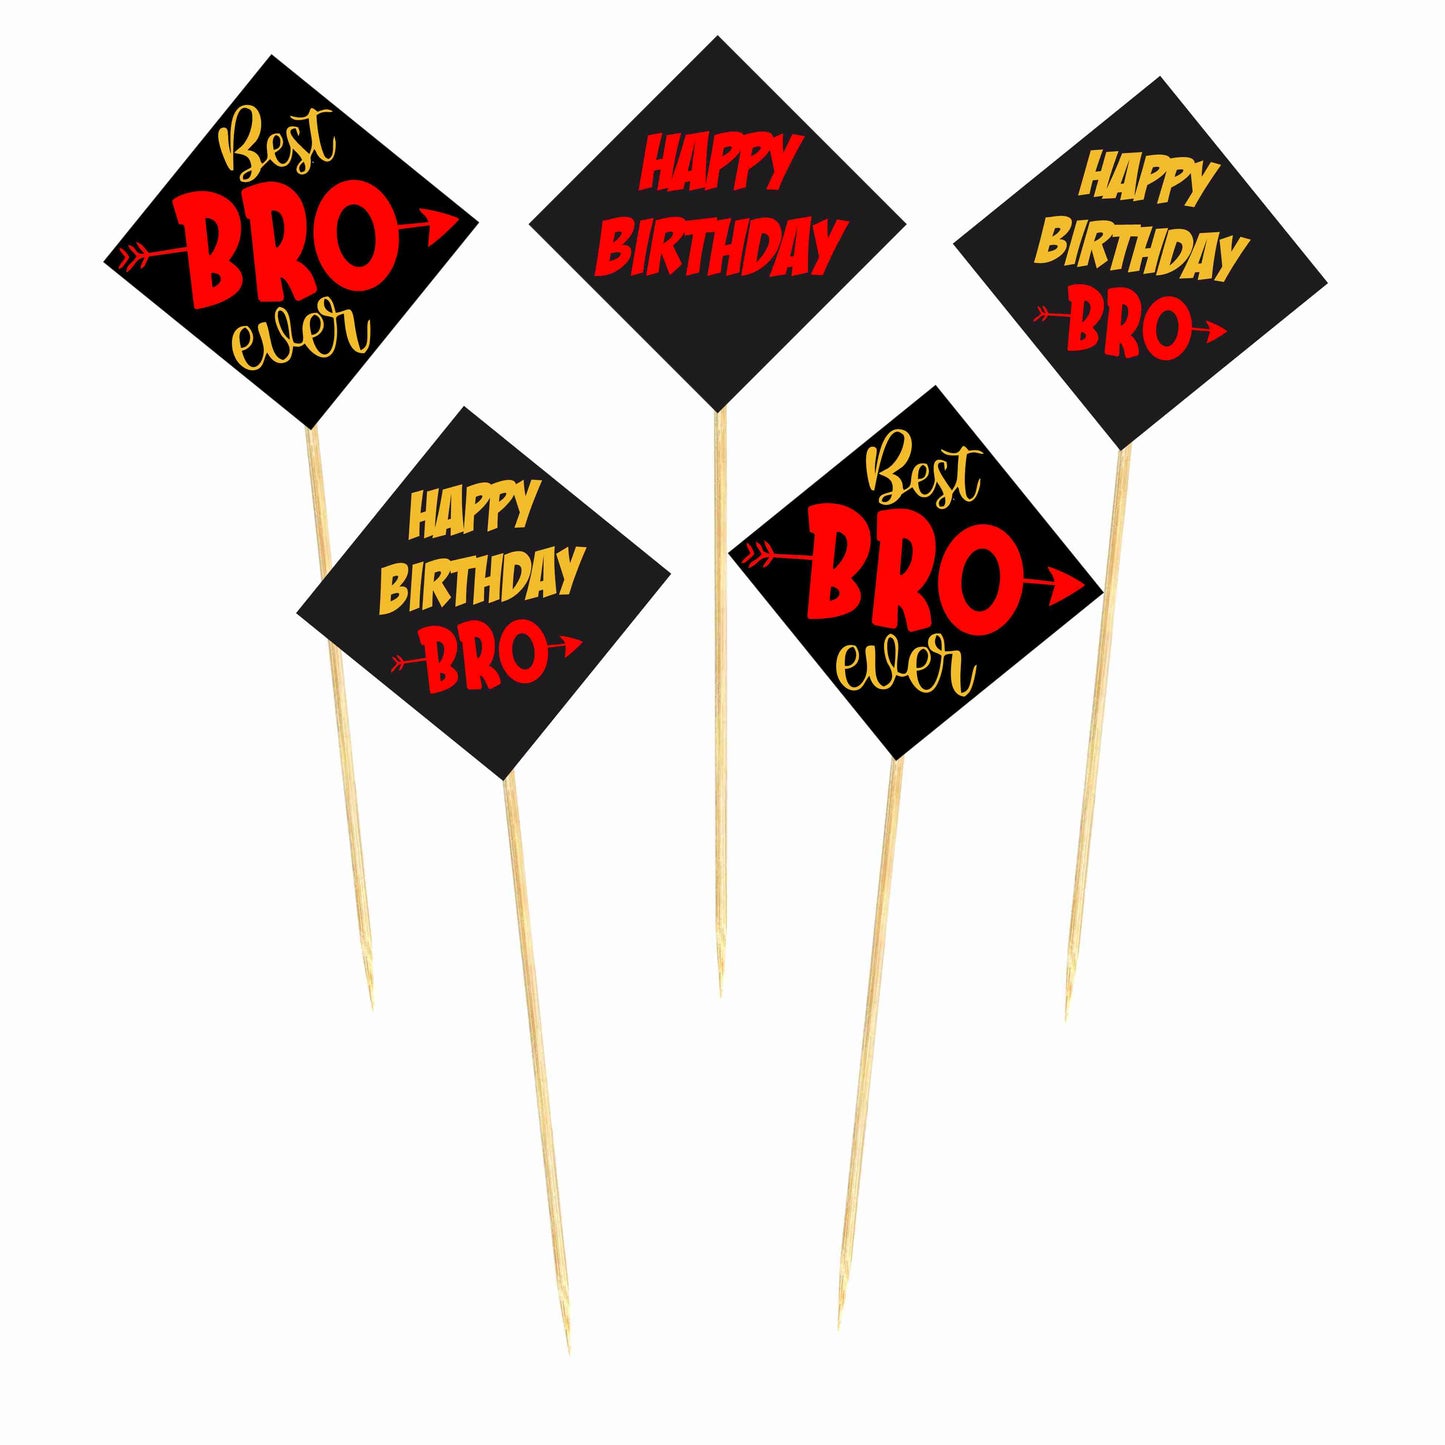 Happy Birthday Bro Cake Topper Pack of 10 Nos for Birthday Cake Decoration Theme Party Item